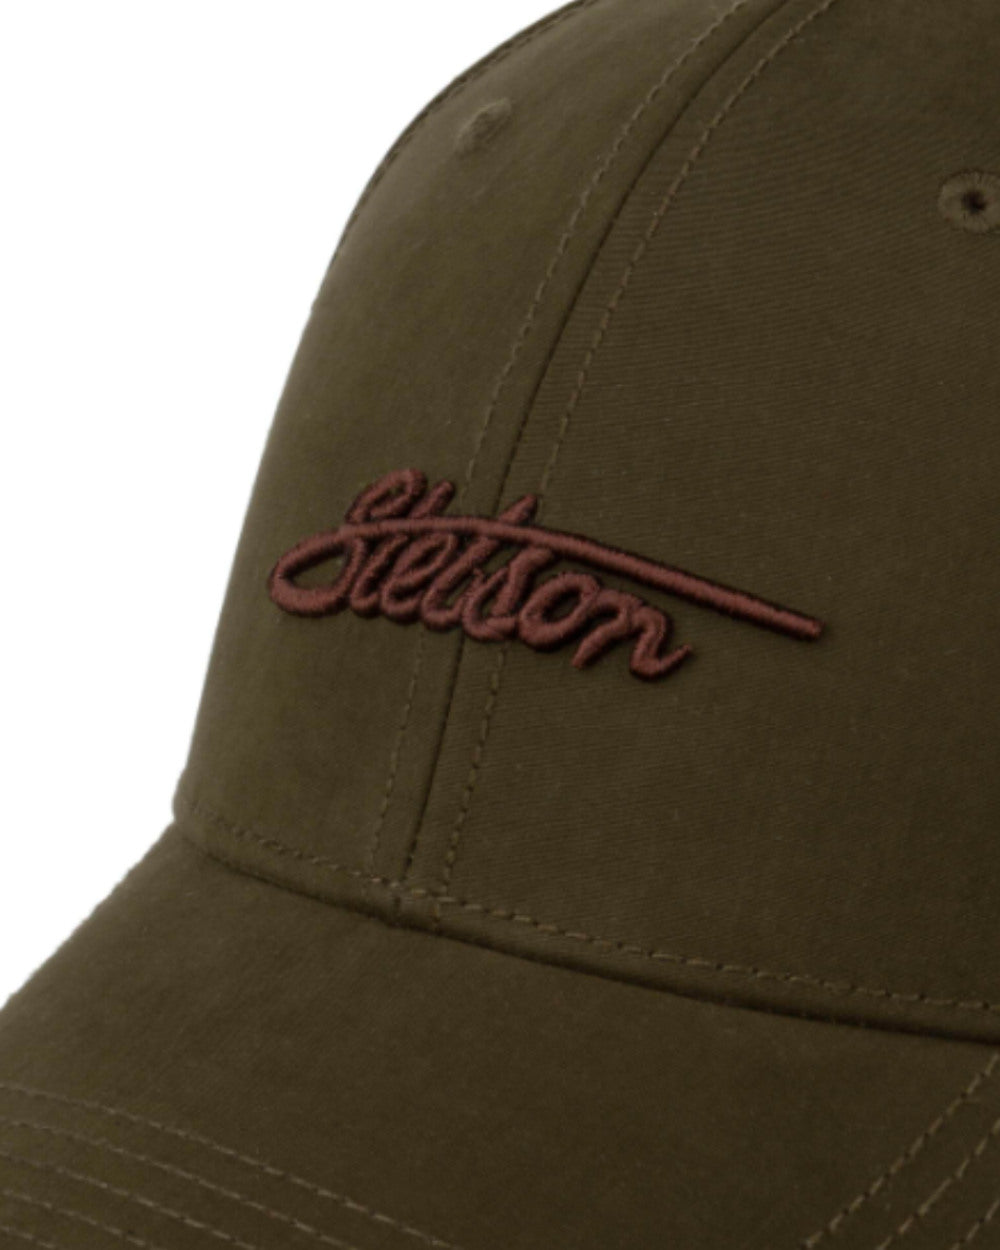 Olive Coloured Stetson Waxed Cotton Baseball Cap On A White Background 